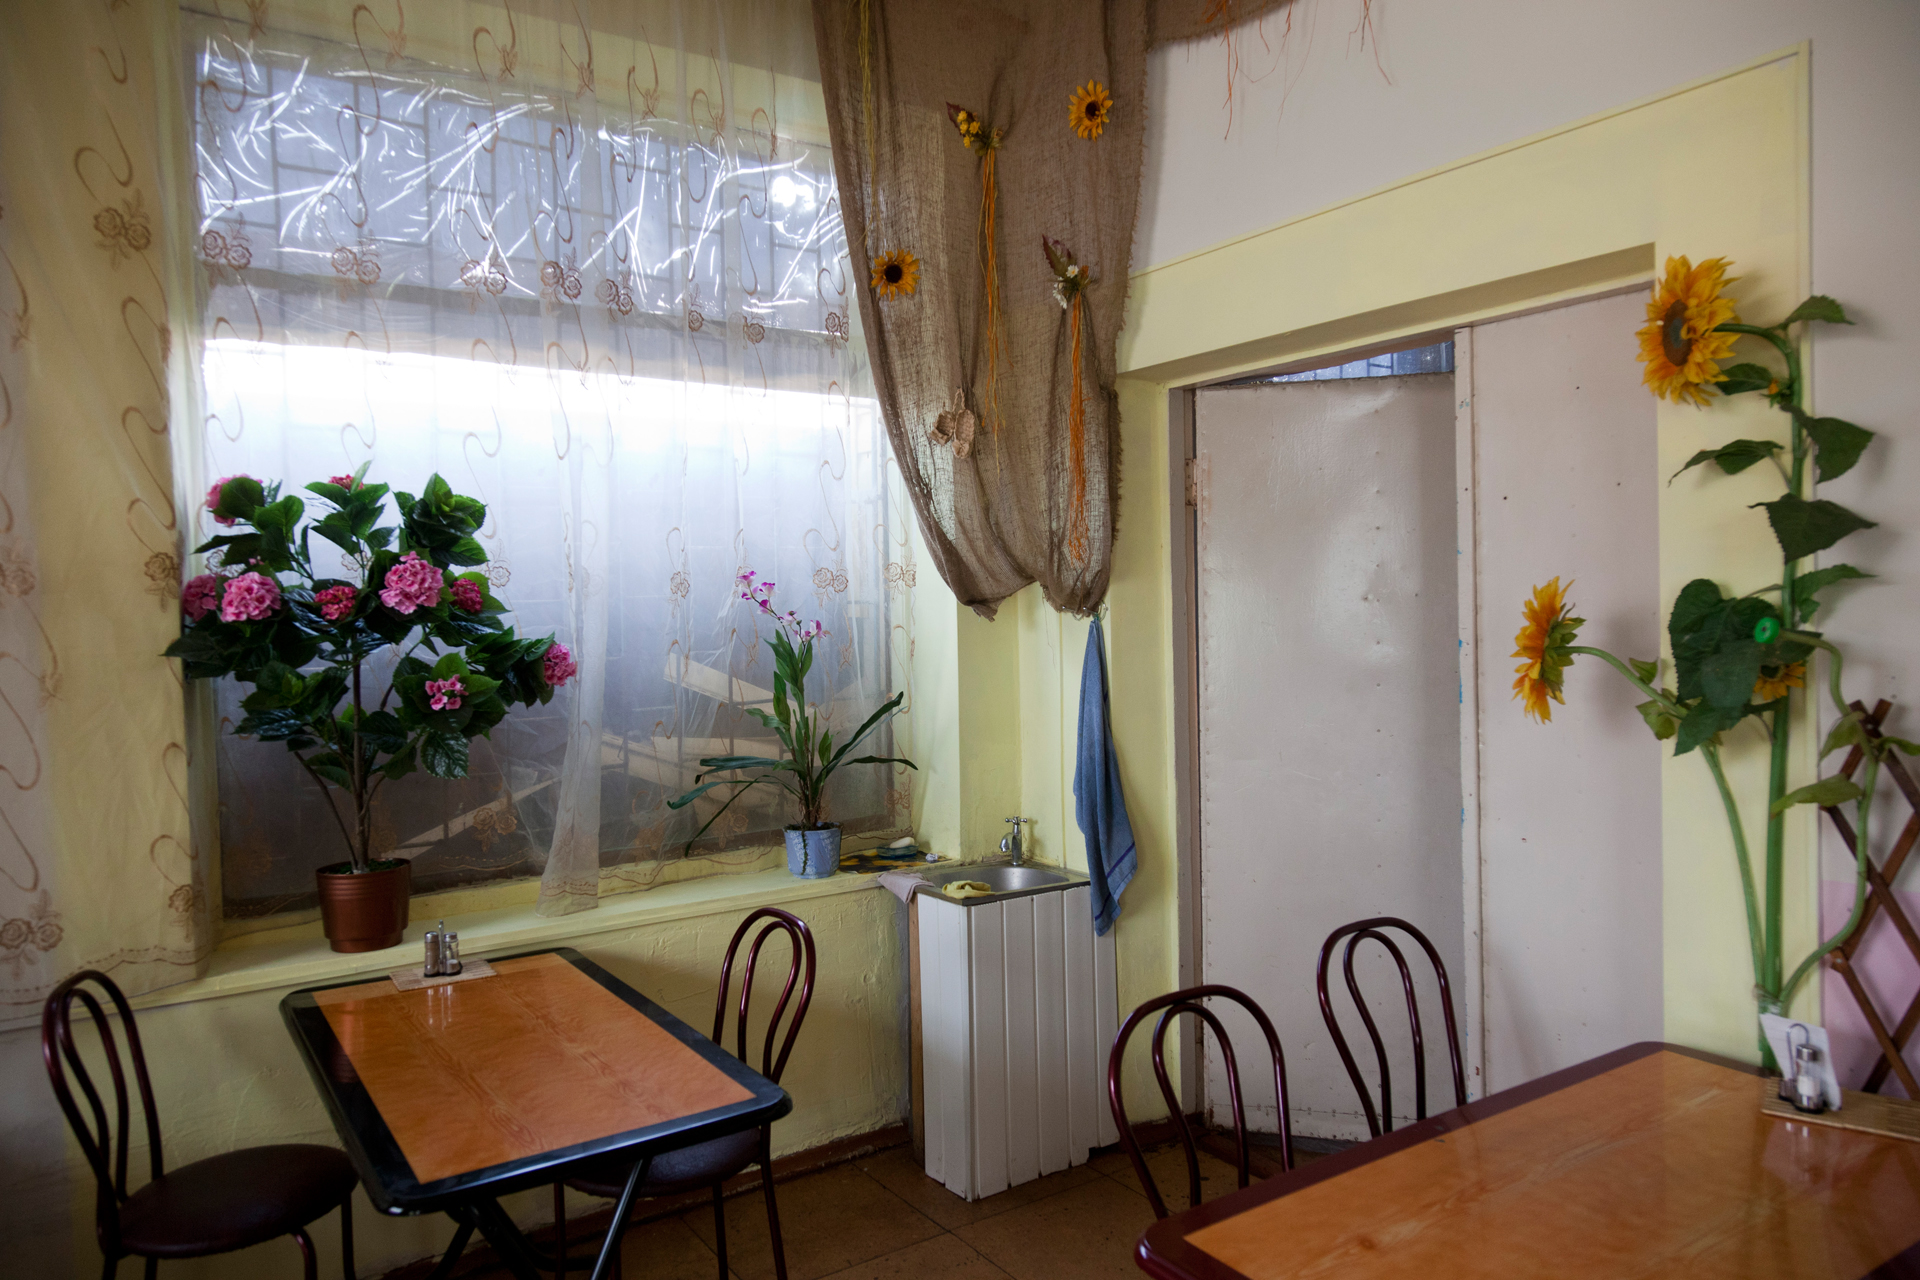  Even though it was only opened a few years ago, the Selena restaurant inside the central market in Simferopol exudes the charm of an old Soviet restaurant.  Simferopol, Crimea  